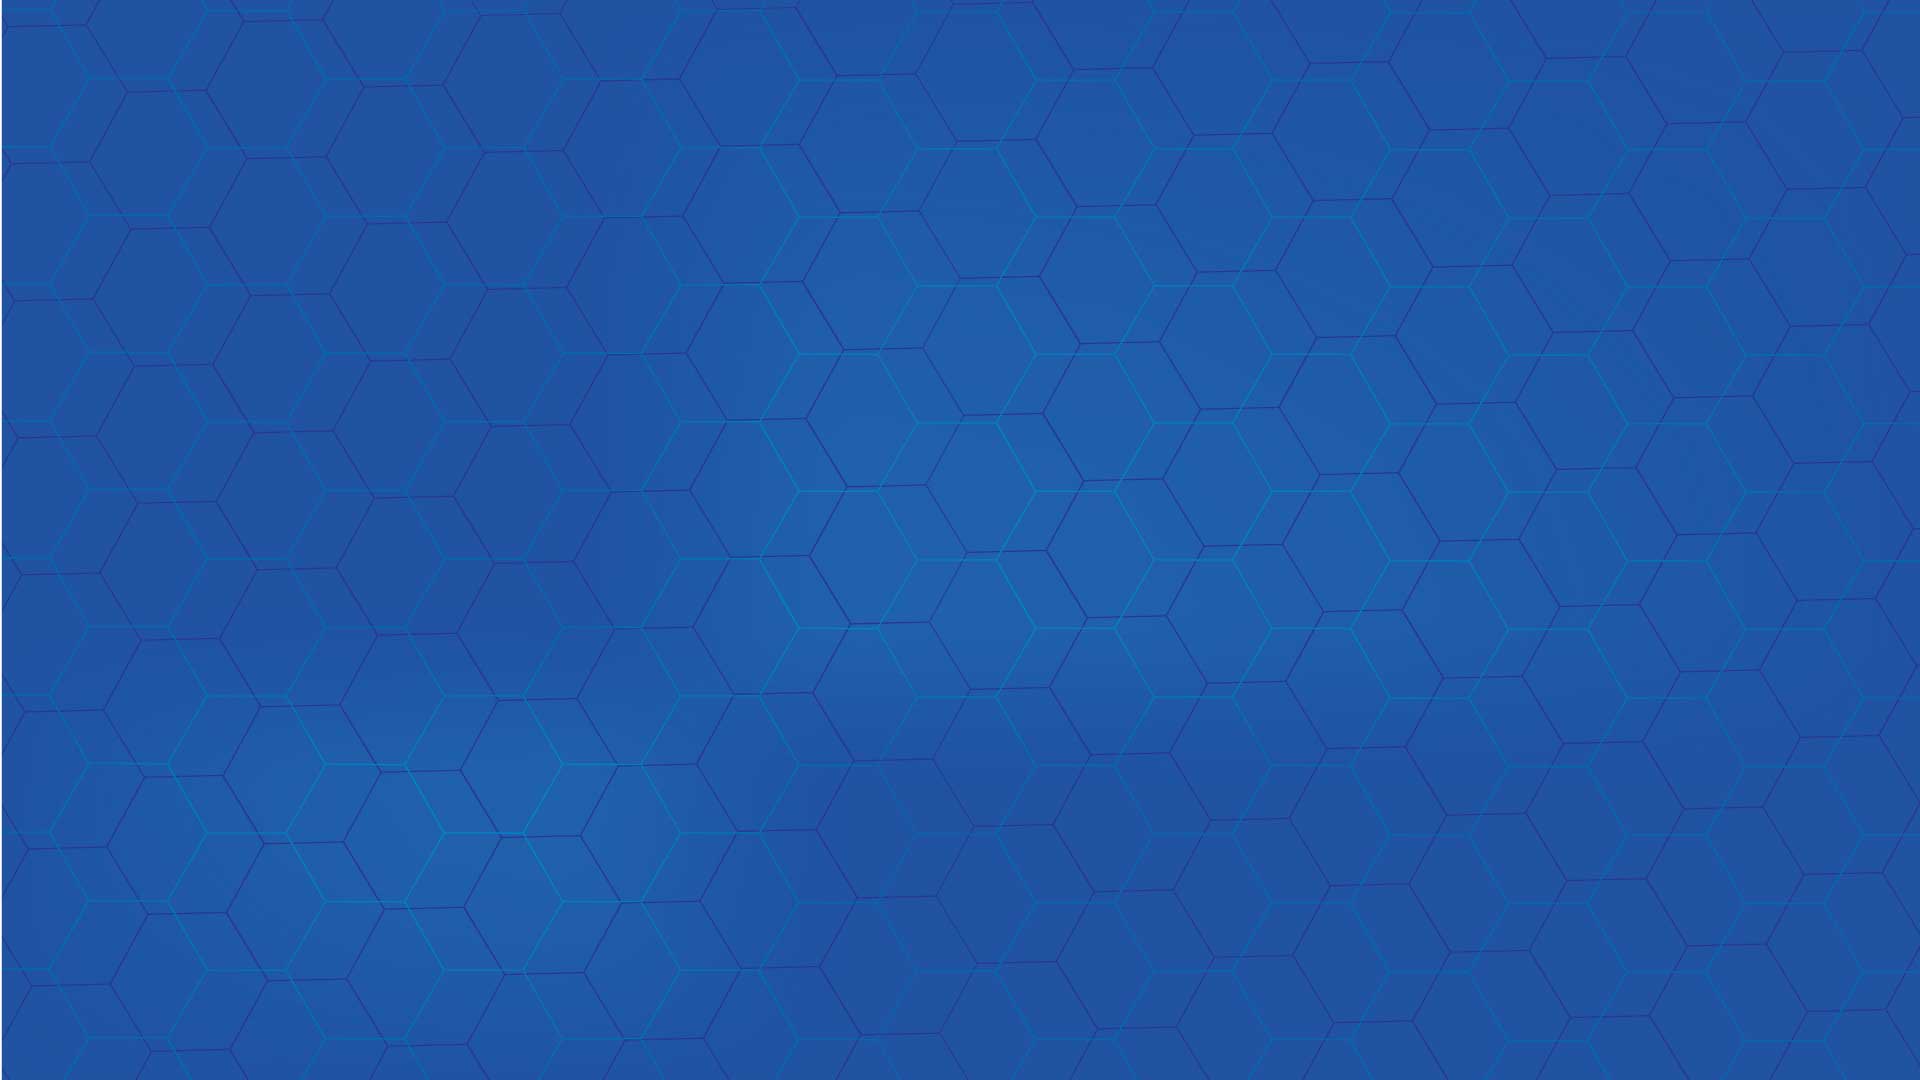 Blue Texture Background Hd Wallpaper 1000 Free Download Vector Image Png Psd Files